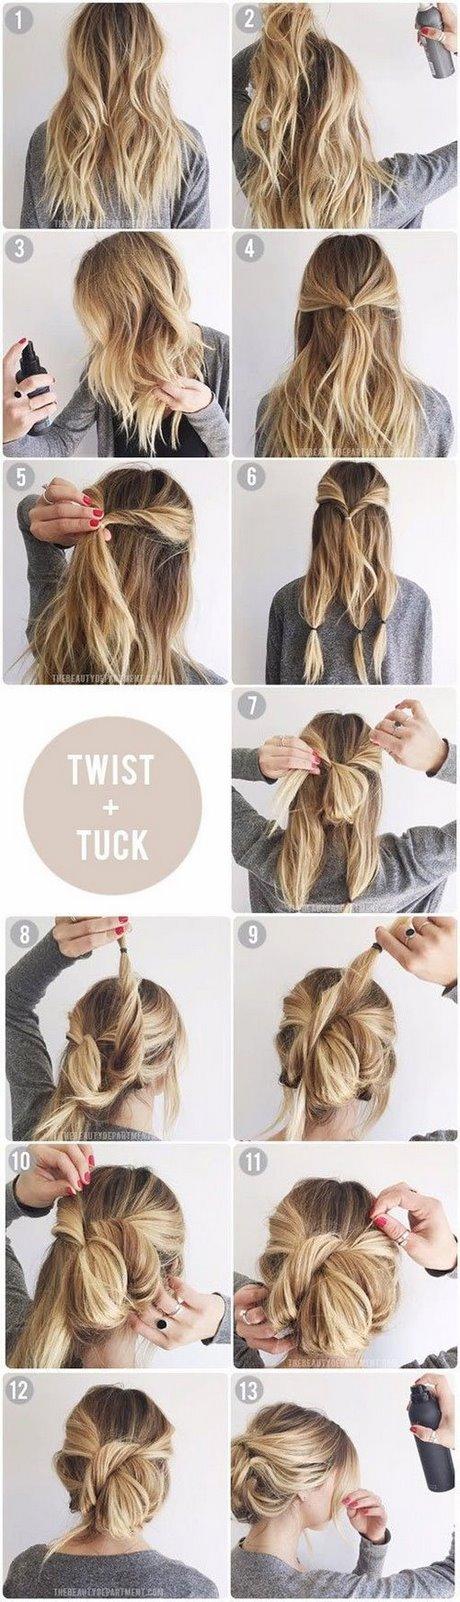 Easy updo hairstyles for prom easy-updo-hairstyles-for-prom-30_10